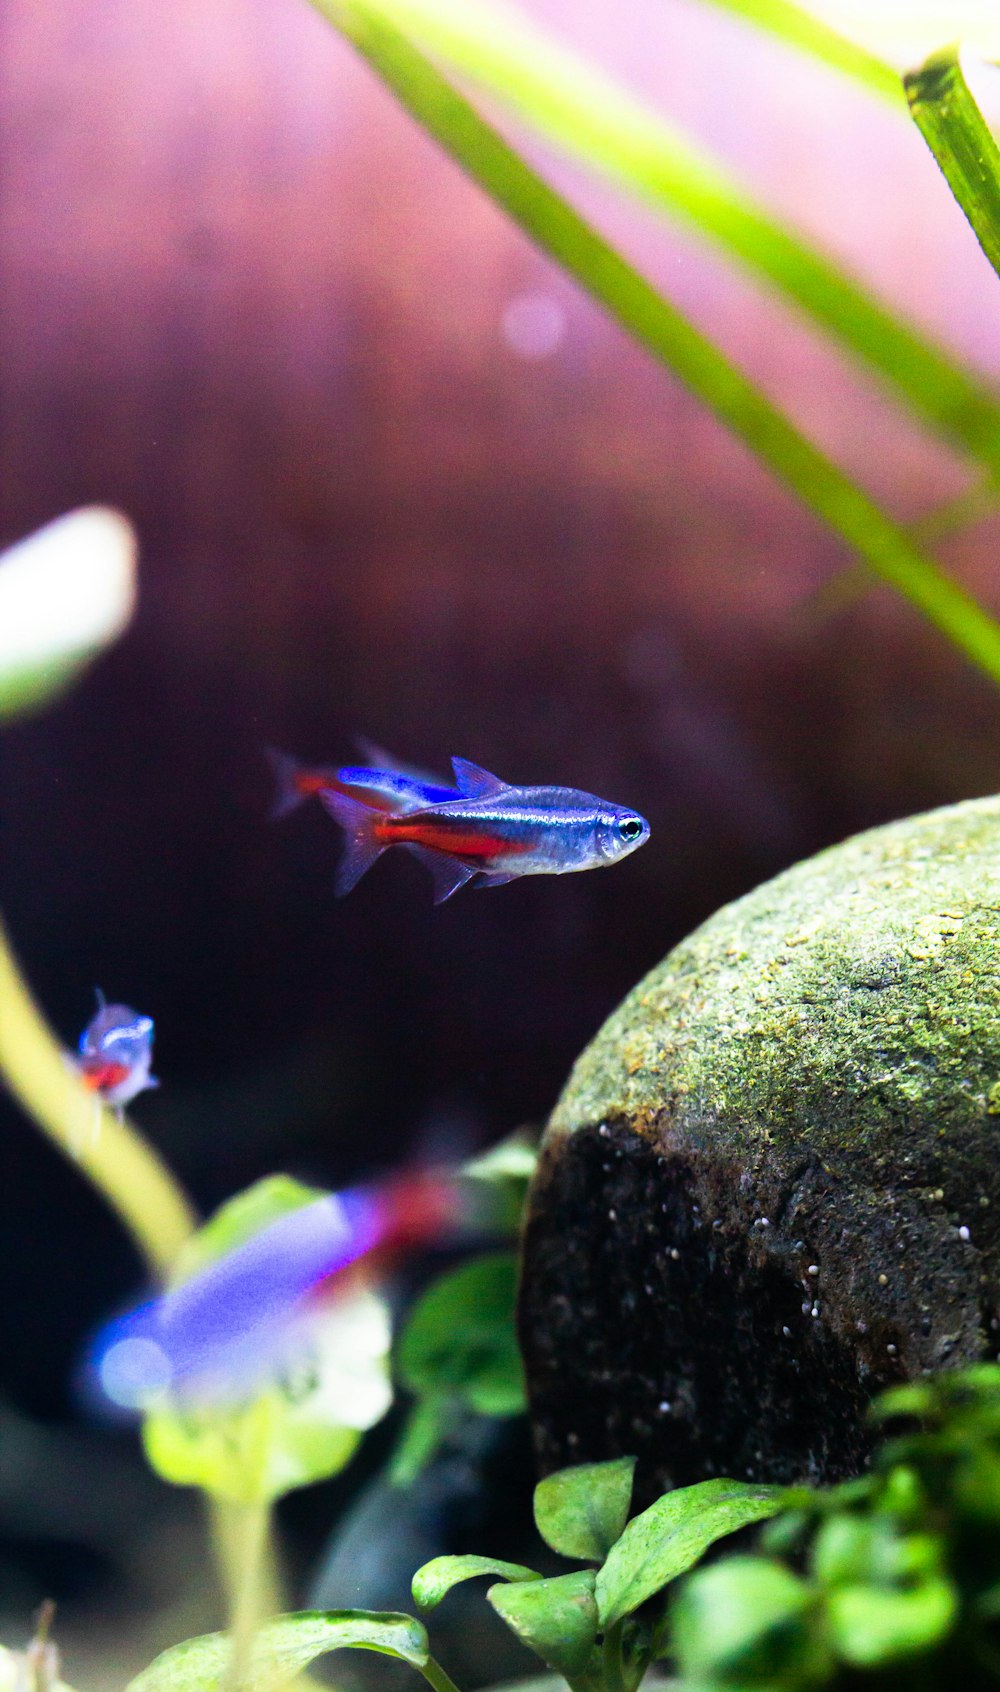 a small blue and red fish in an aquarium